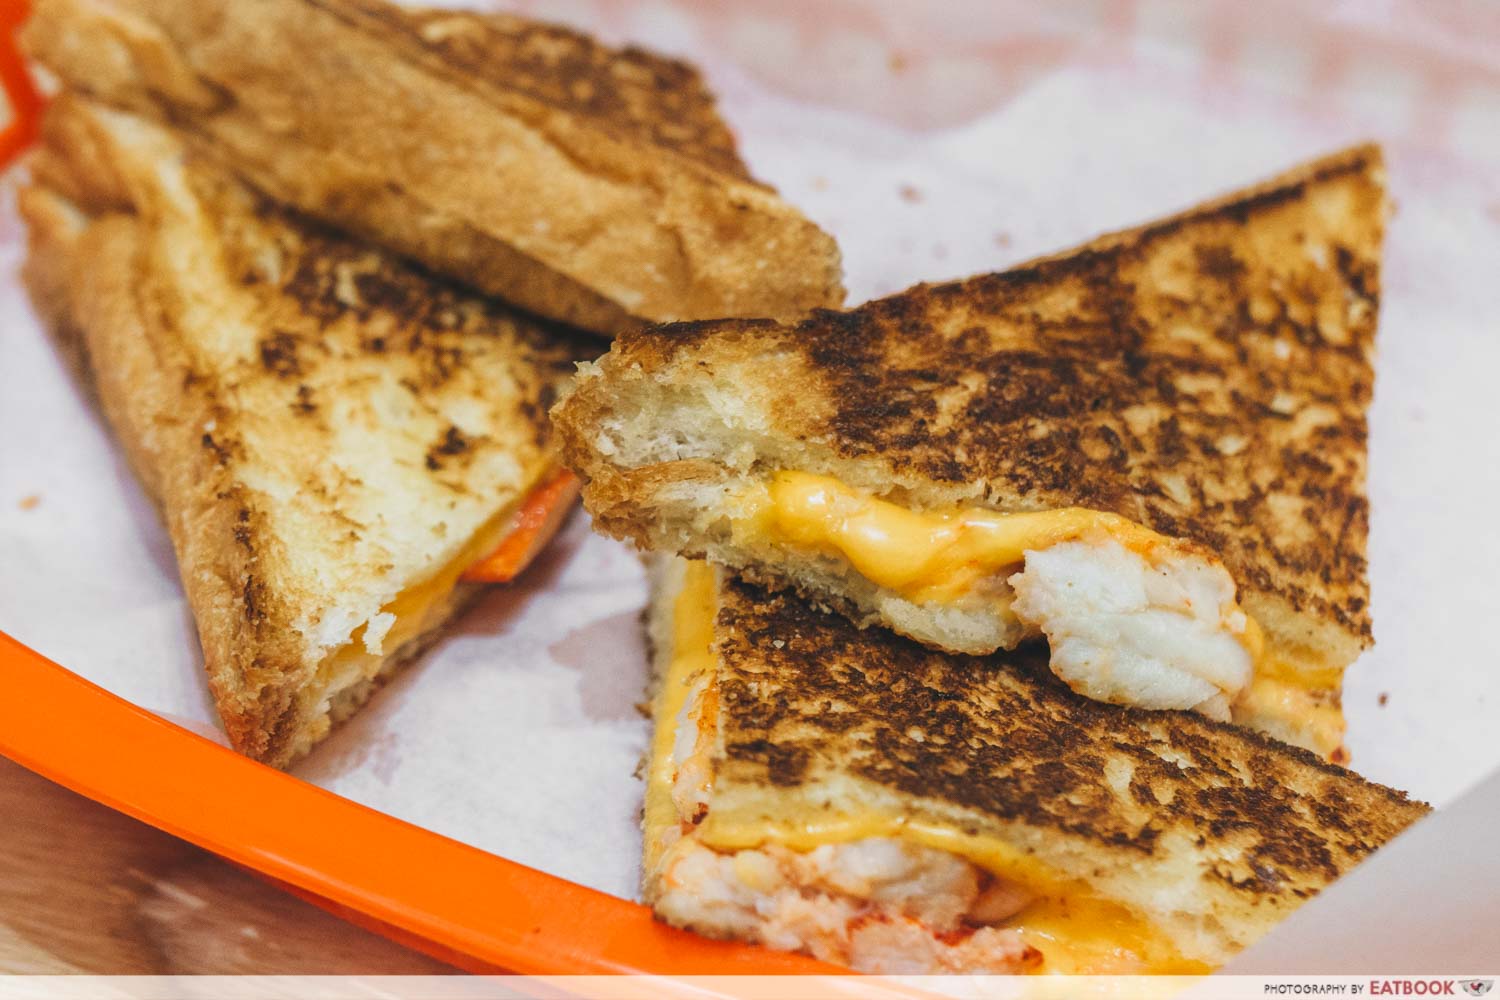 Luke's Lobster grilled cheese